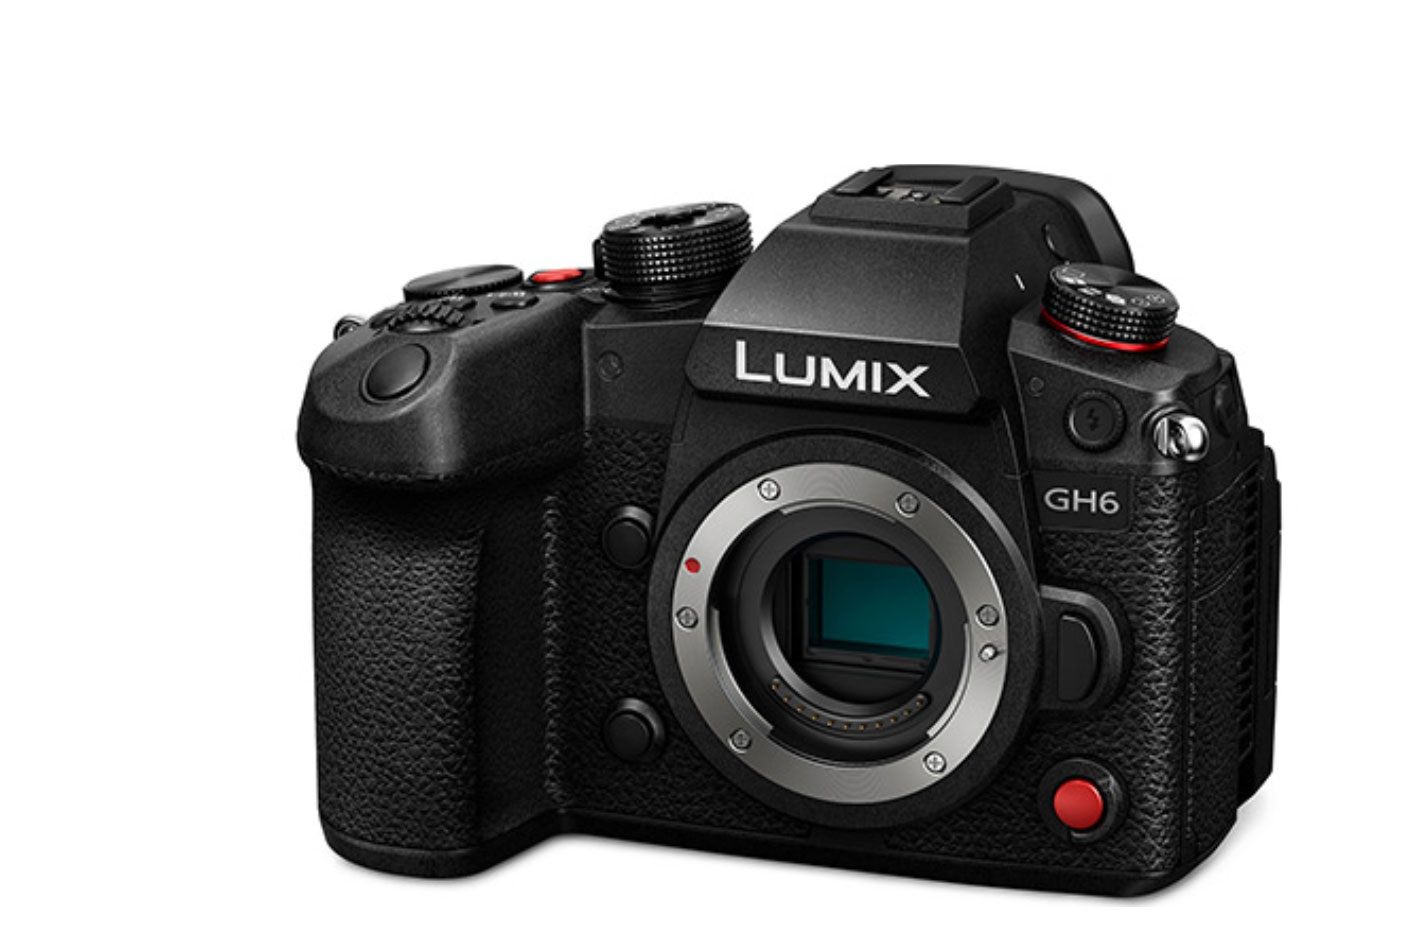 LUMIX GH6: the tech behind the new camera